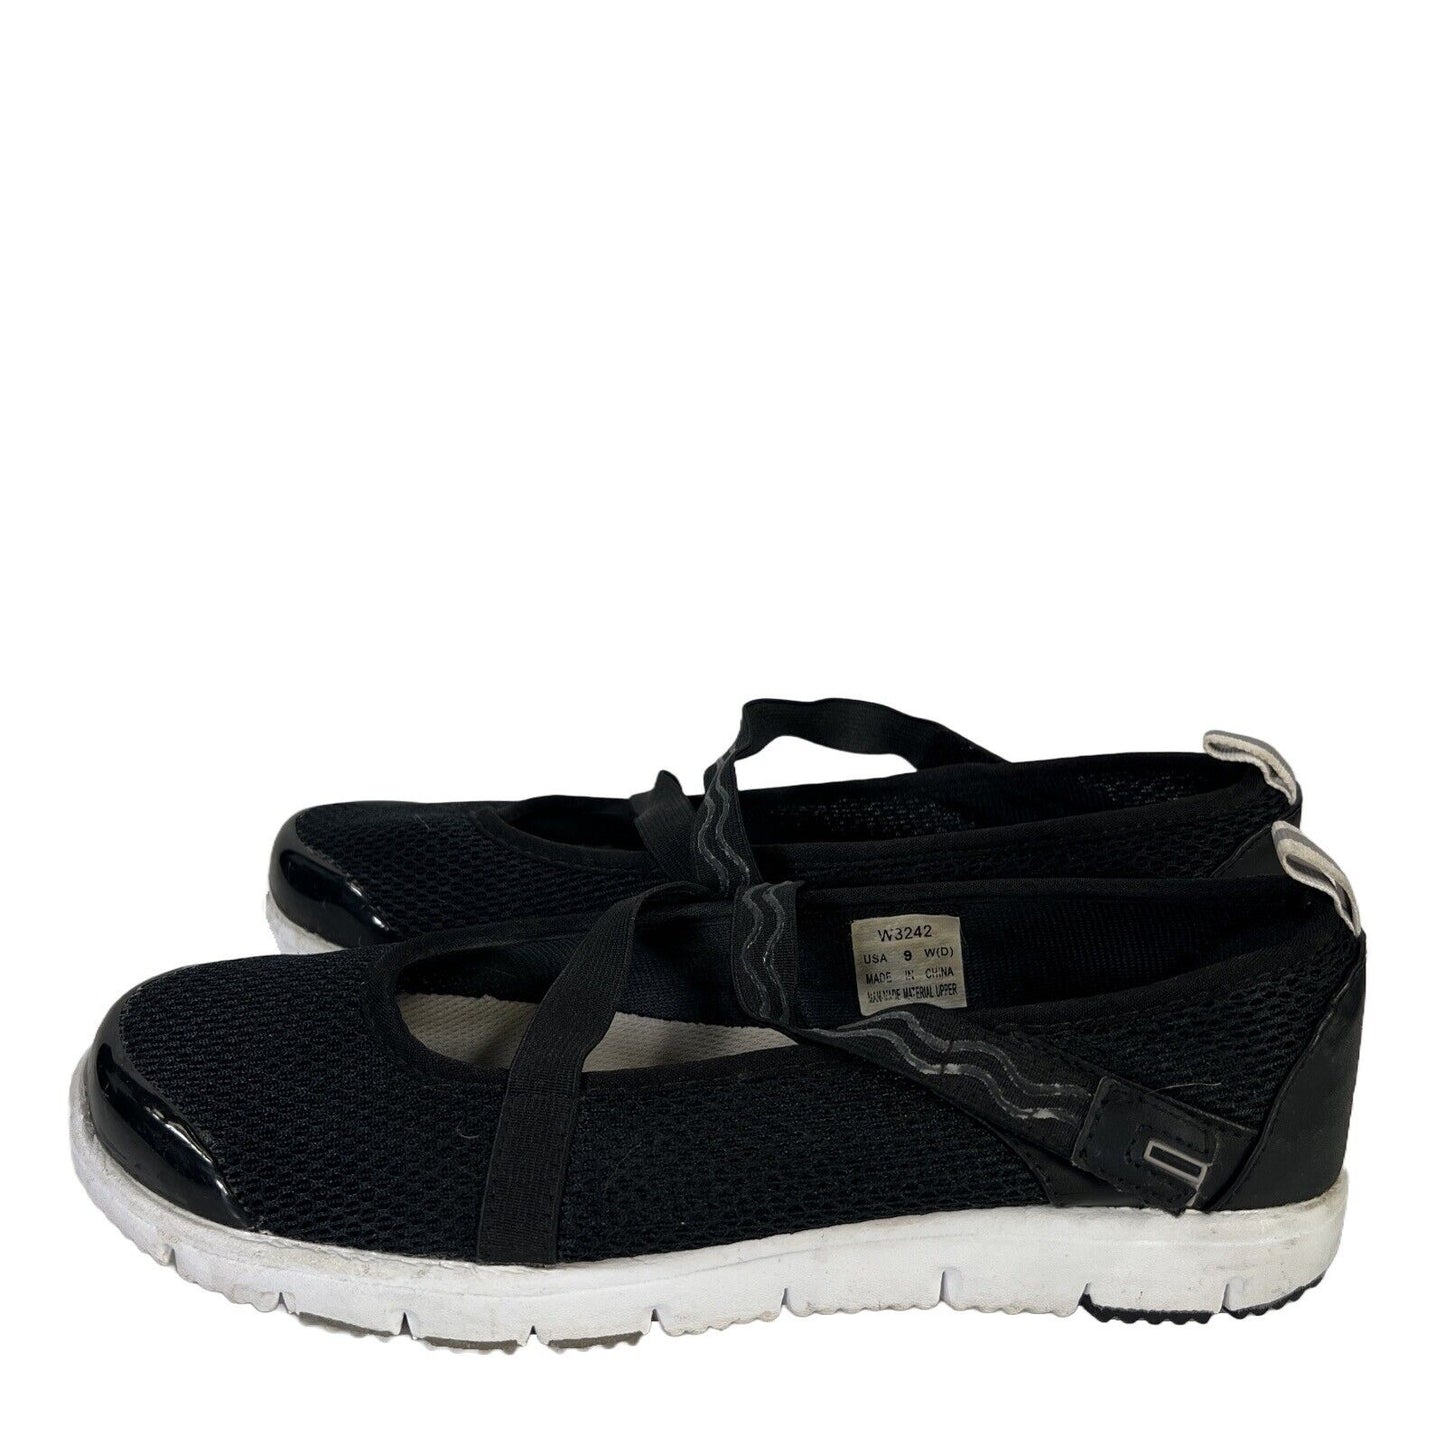 Zapatos deportivos Propet Mary Jane TravelWalker negros para mujer - 9D de ancho